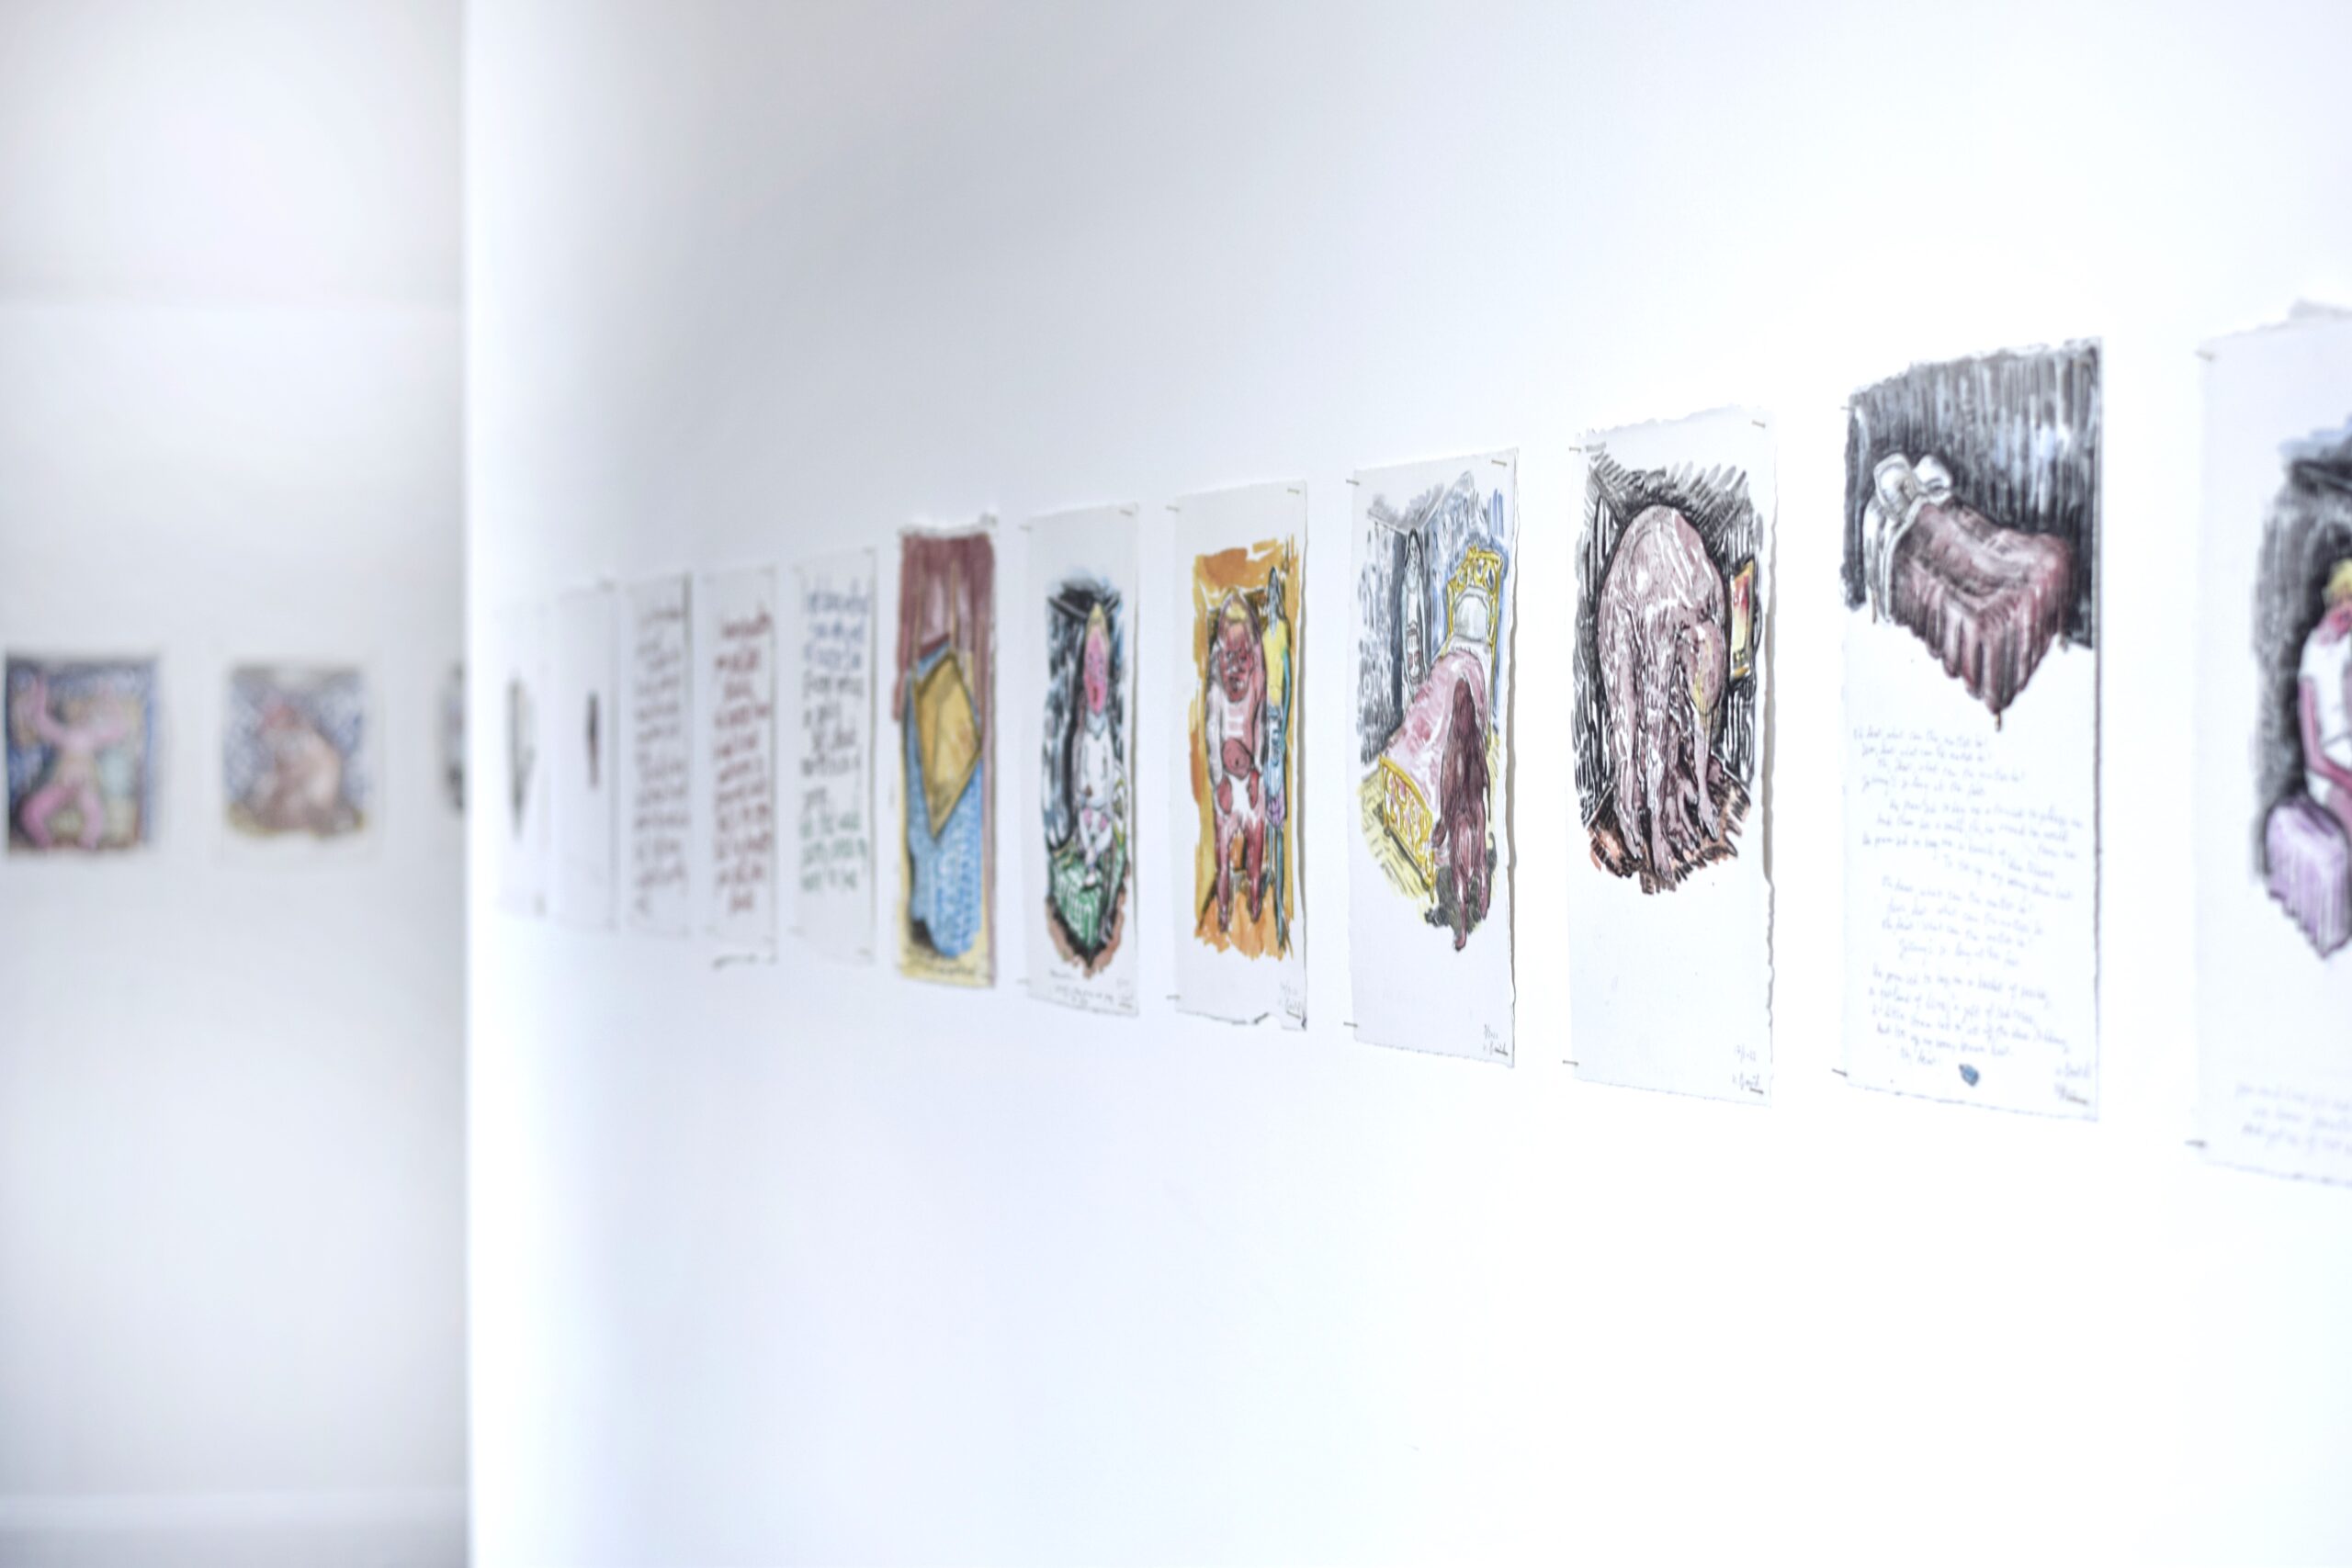 Exhibition view showing a row of 12 water colour art works with mixture of handwritten texts and images on torn paper pinned to the wall. In the distance a second wall with similar sized images can be seen.